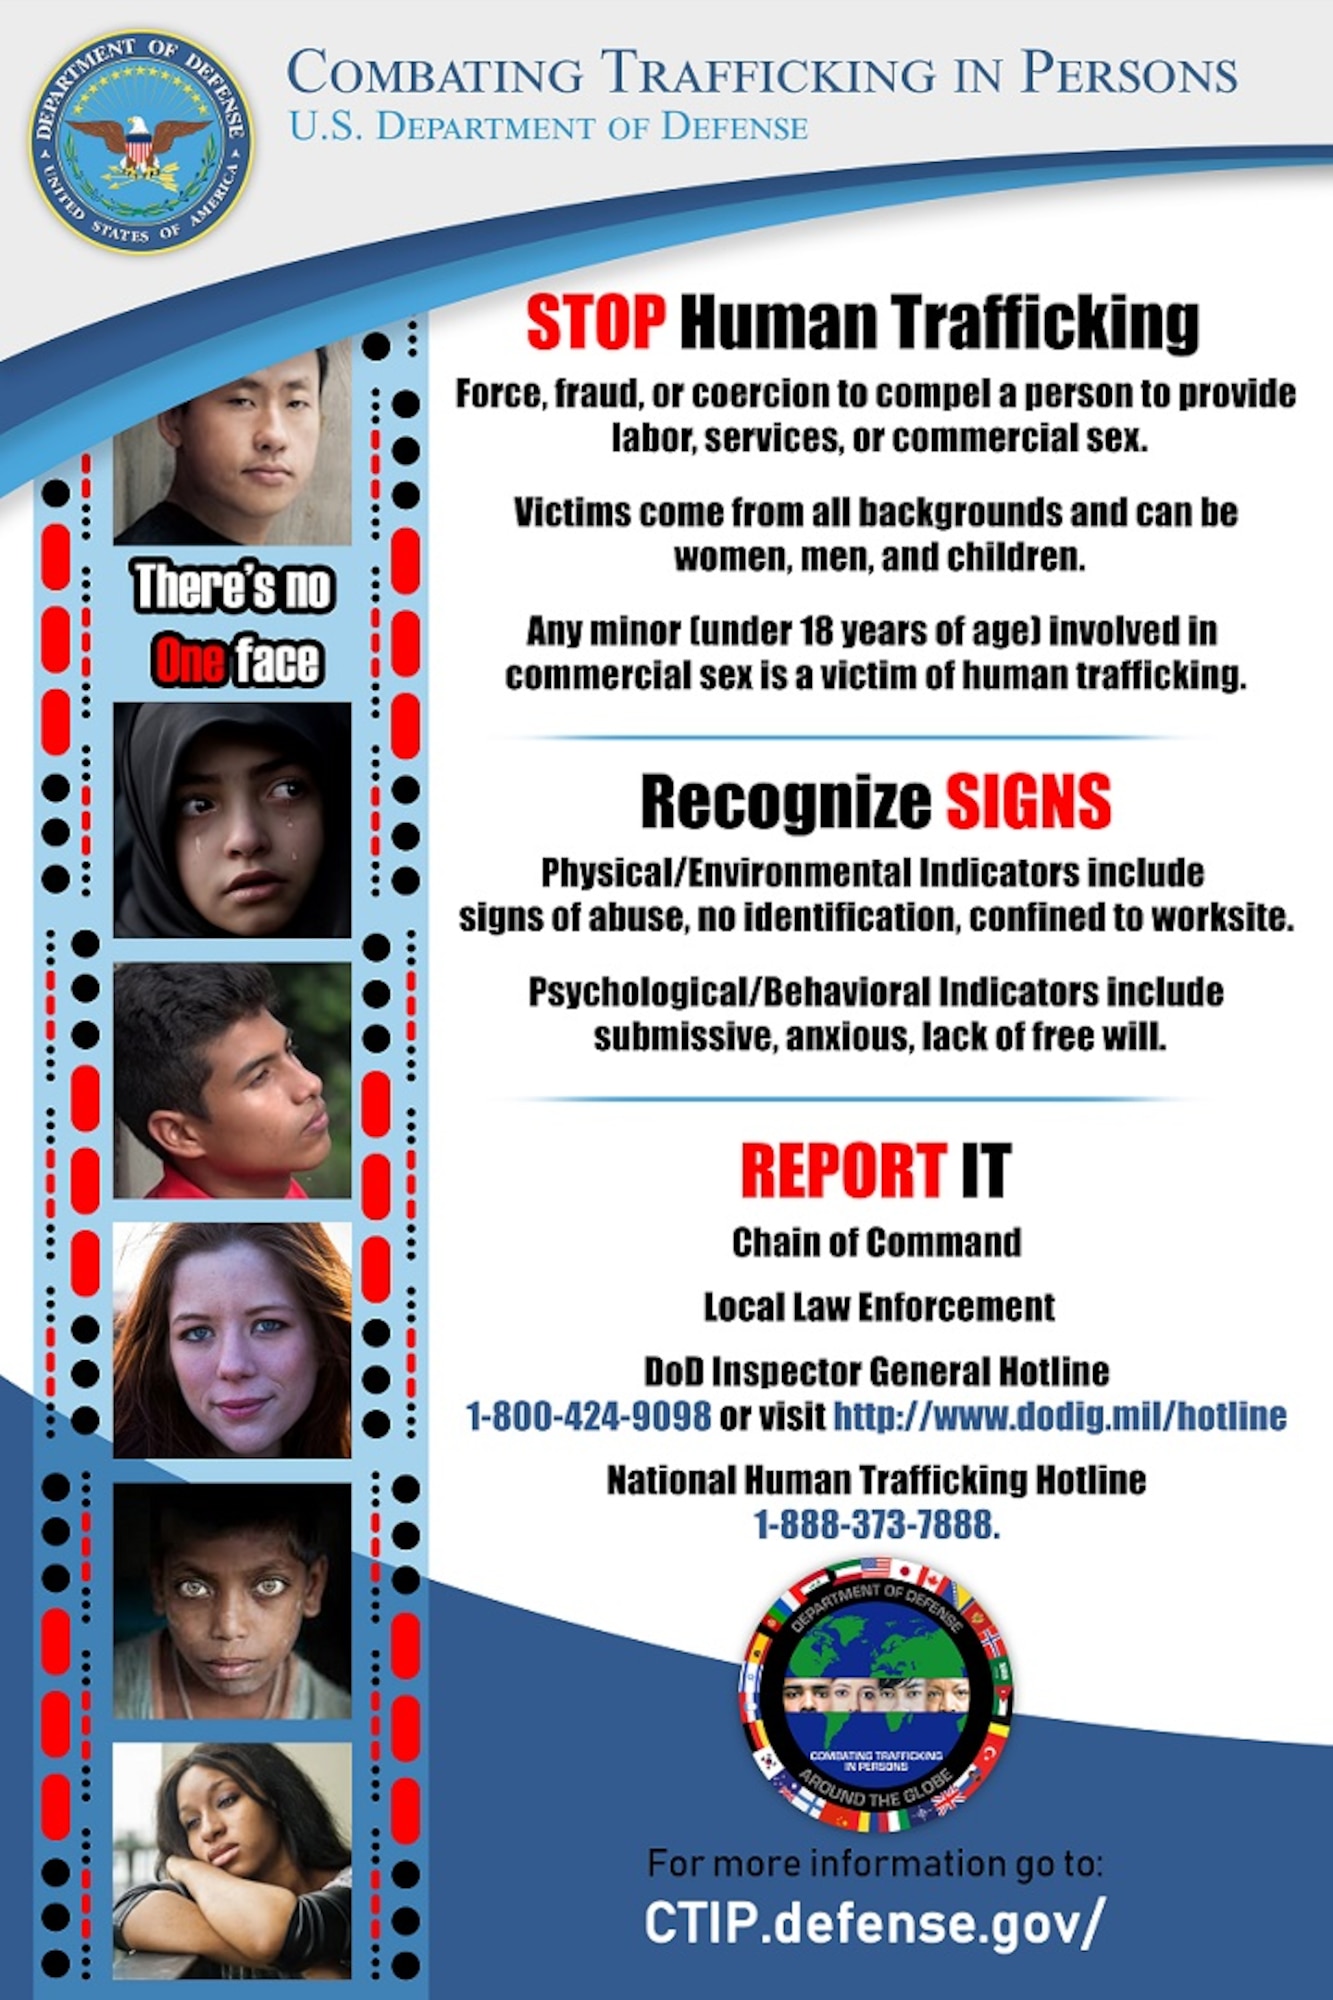 An infographic about combatting human trafficking.